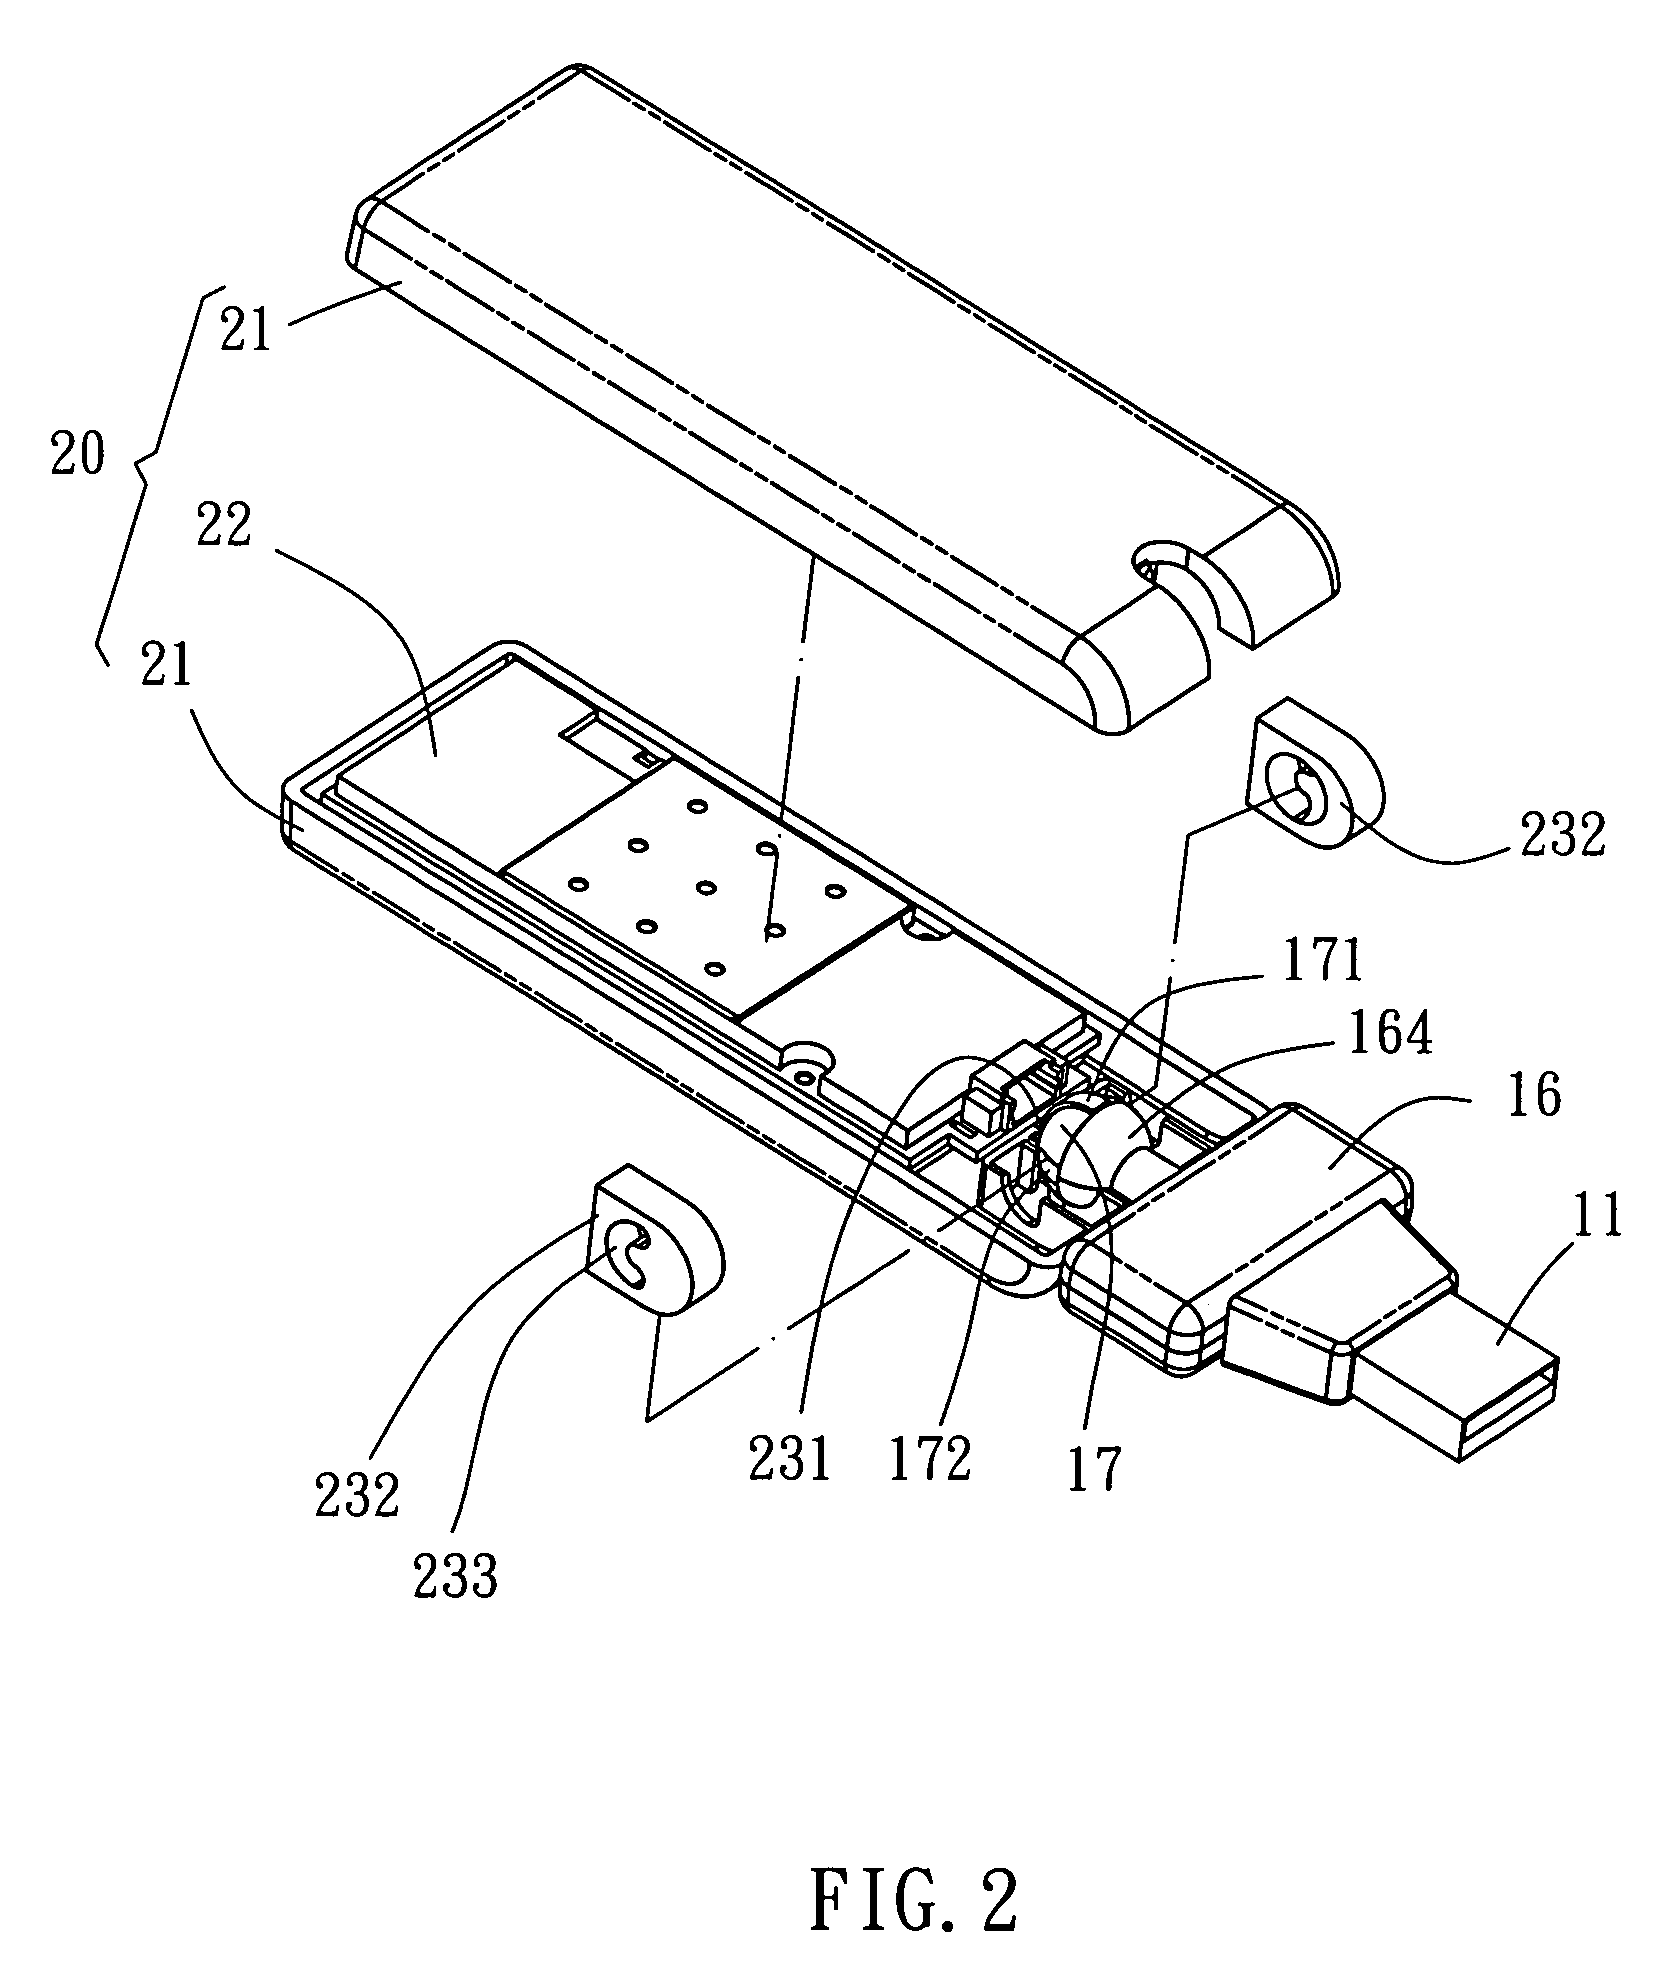 Electronic device capable of multidirectional rotation